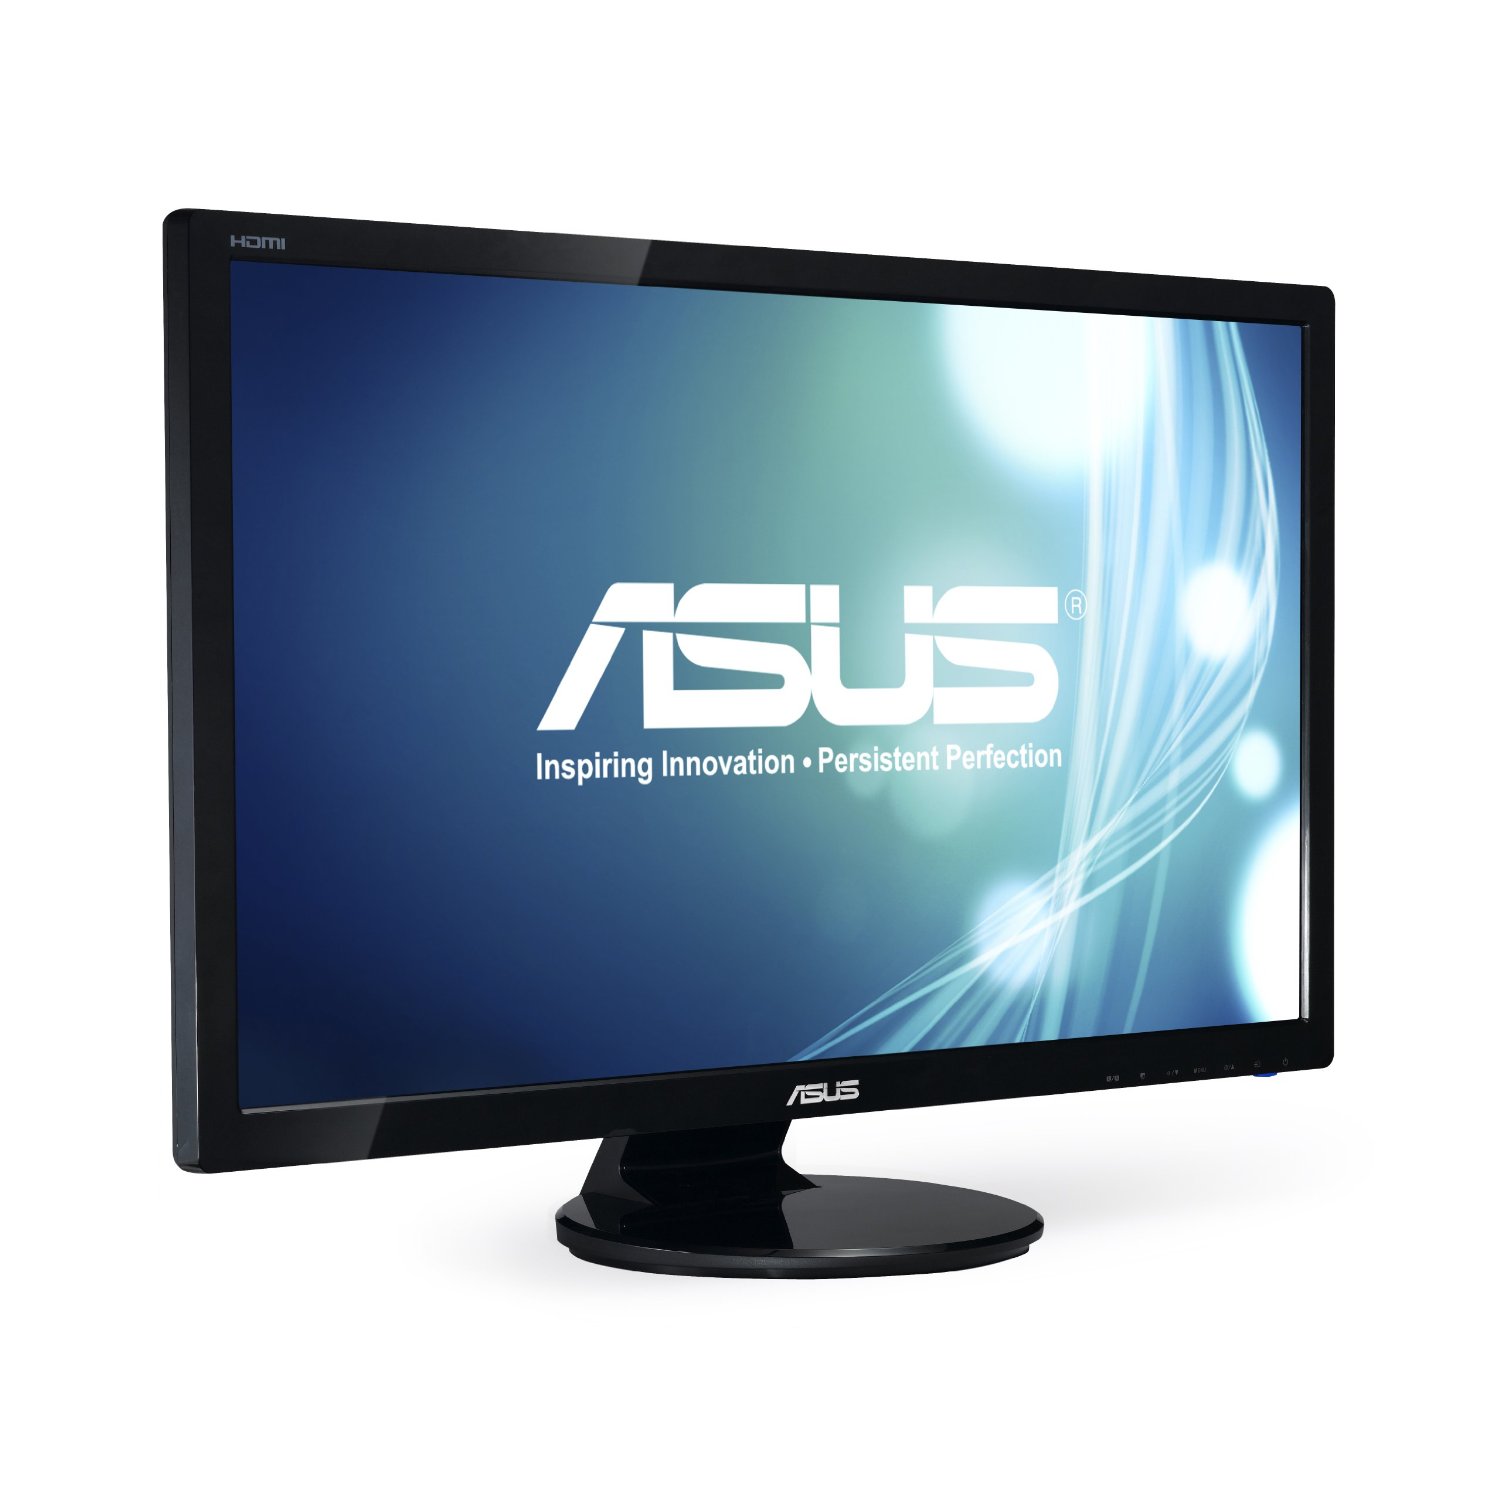 http://thetechjournal.com/wp-content/uploads/images/1110/1319692762-asus-ve276q-27inch-wide-2ms-response-time-display-port-lcd-monitor-5.jpg